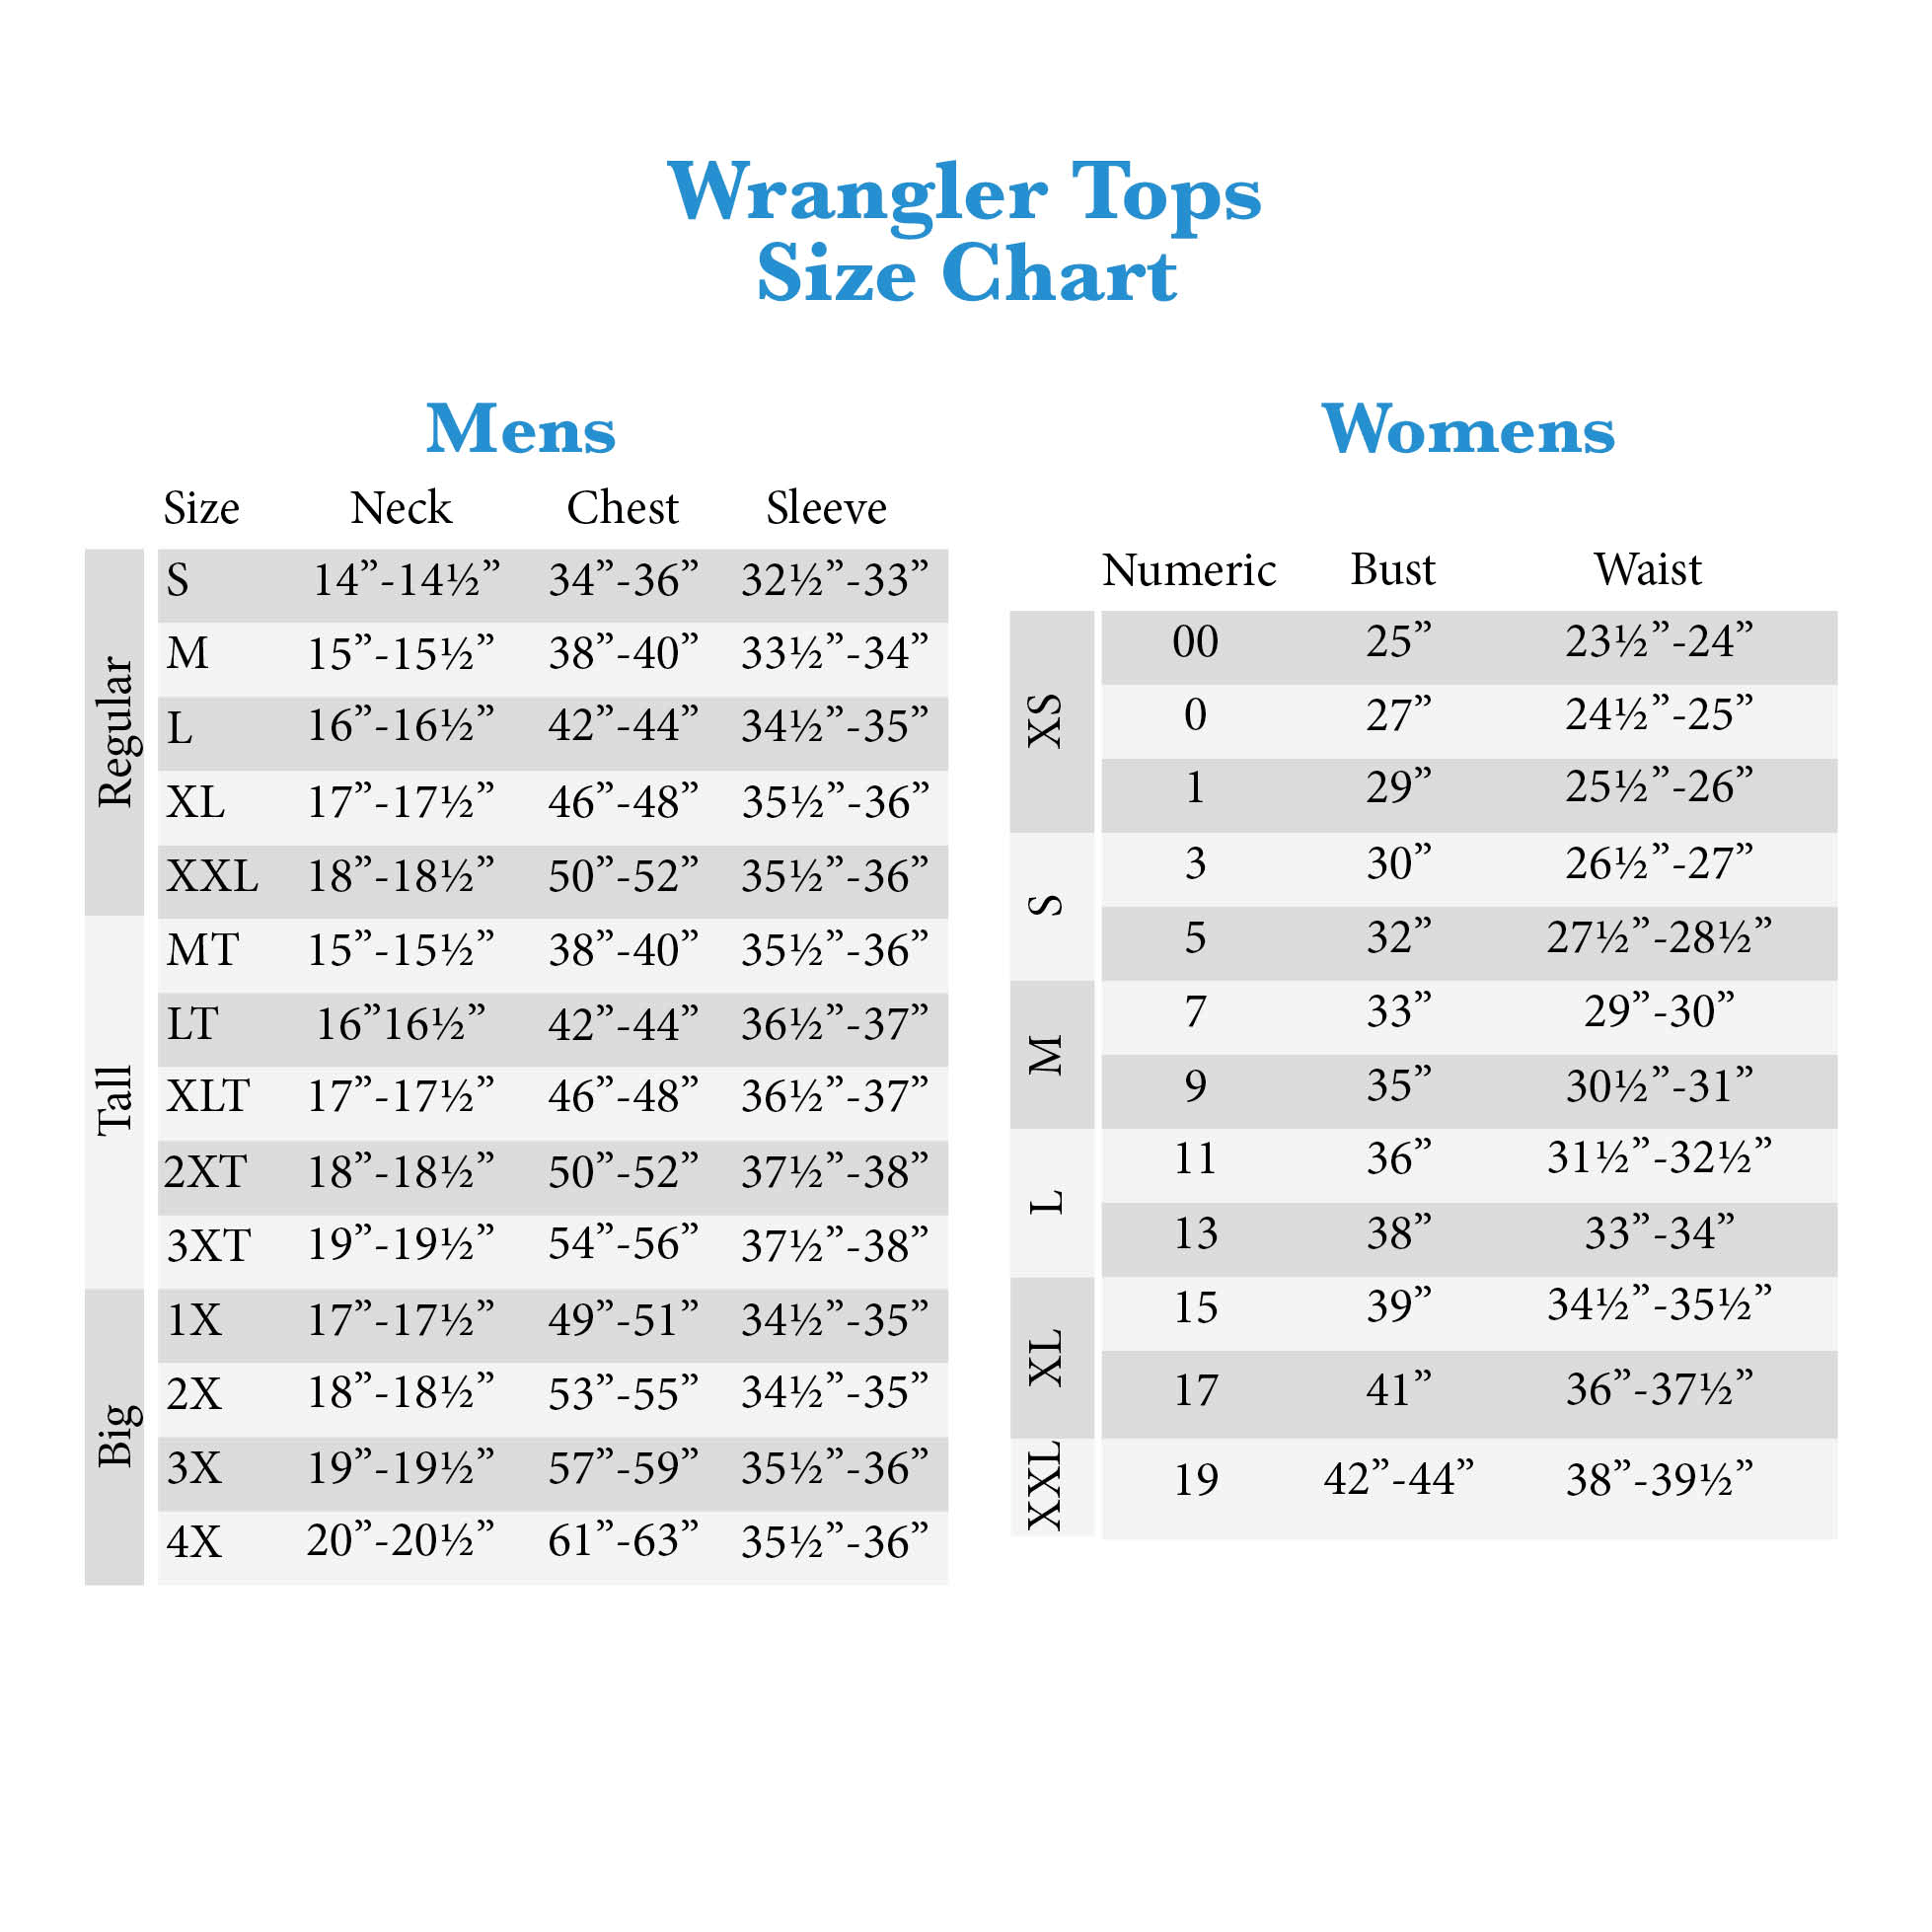 Western Jeans Size Chart